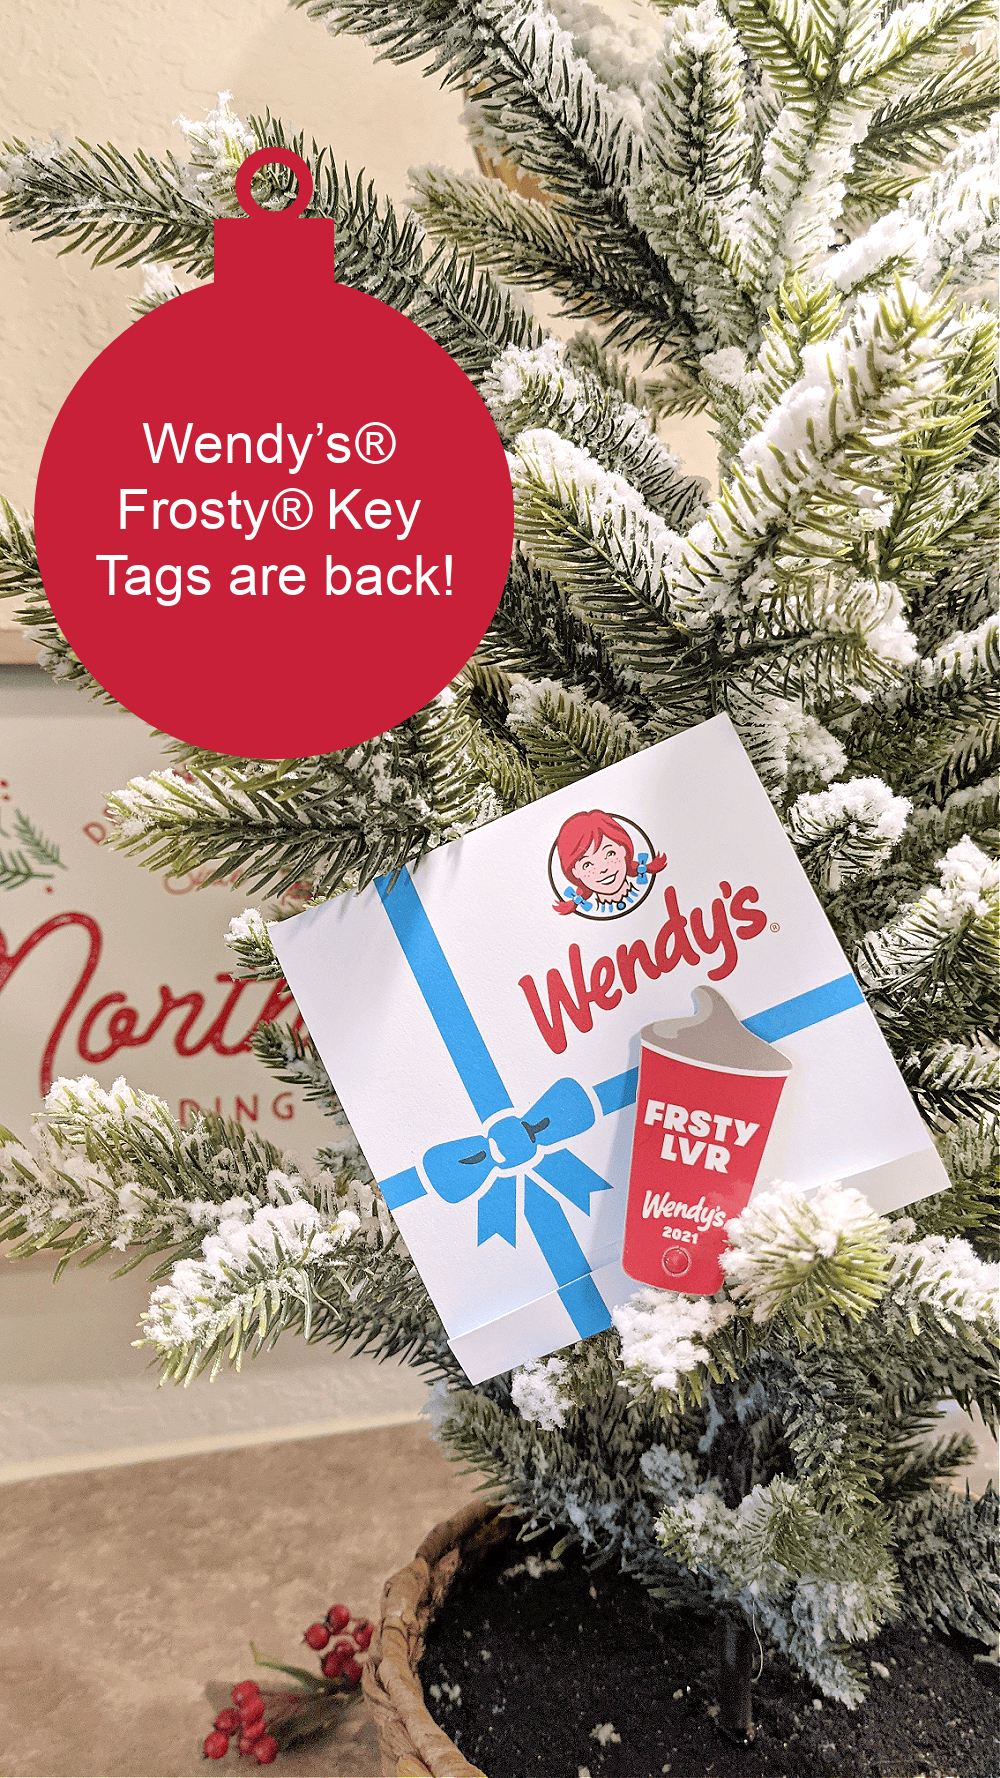 Wendy’s® annual Frosty® Key Tags fundraising program runs now through January 31, 2021. You can purchase a Wendy’s Frosty Key Tags for just $2 each, redeemable for one free Jr. Frosty treat per visit with any purchase in 2021 to support the DTFA’s efforts to find forever families for children in foster care.